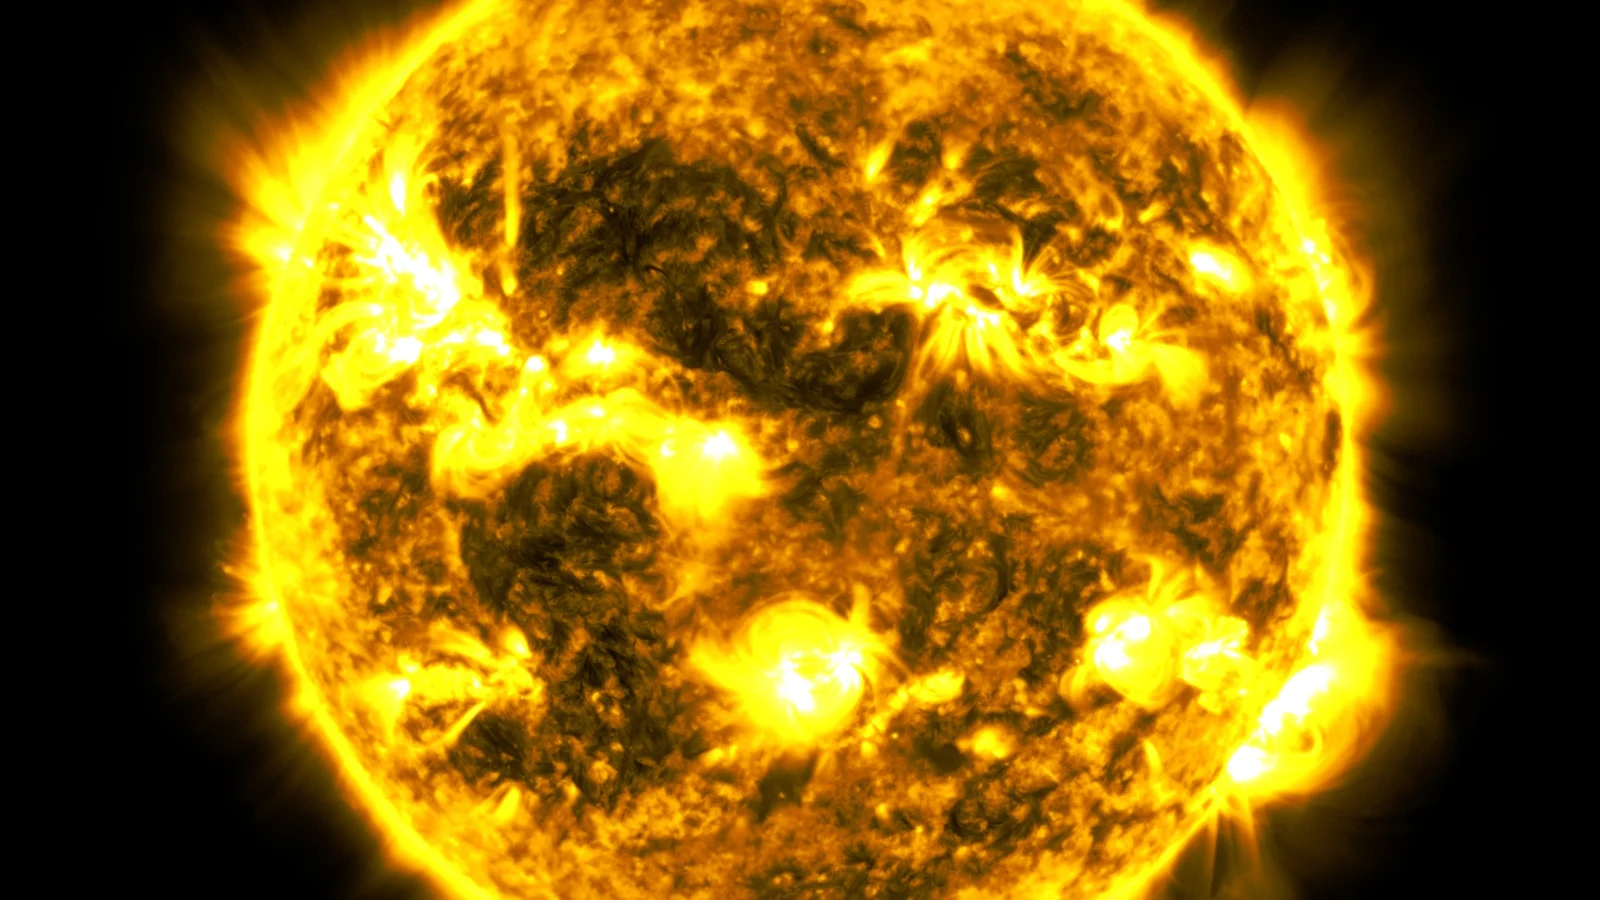 Mesmerizing time-lapse shows off NASA's decade of Sun-watching from space